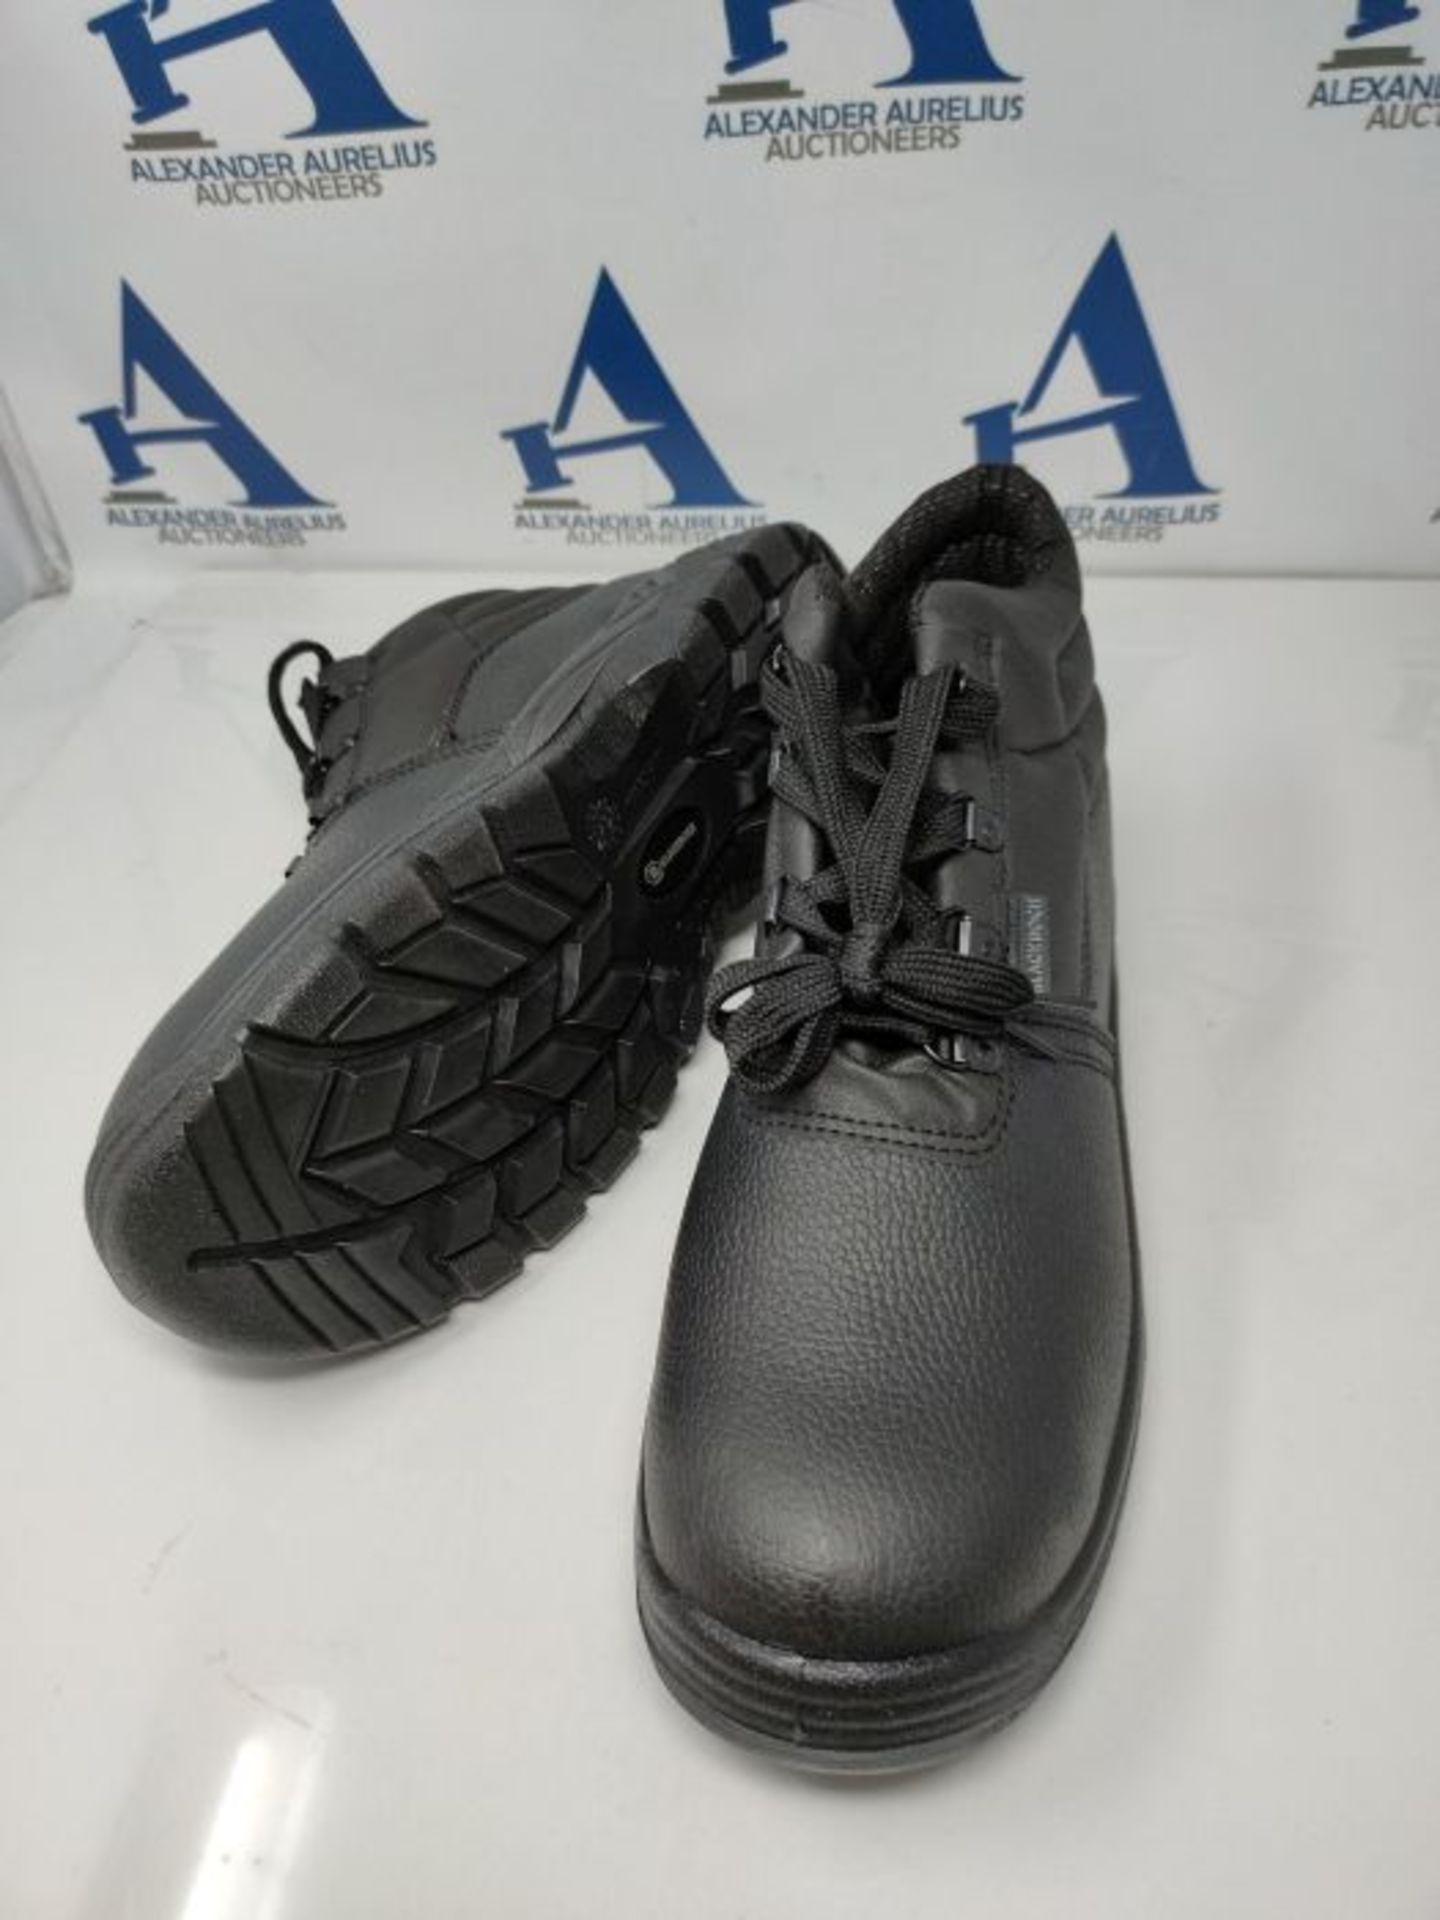 Blackrock SB-P SRC Safety Chukka Boots with Anti Static Protection, Black Leather Safe - Image 3 of 3